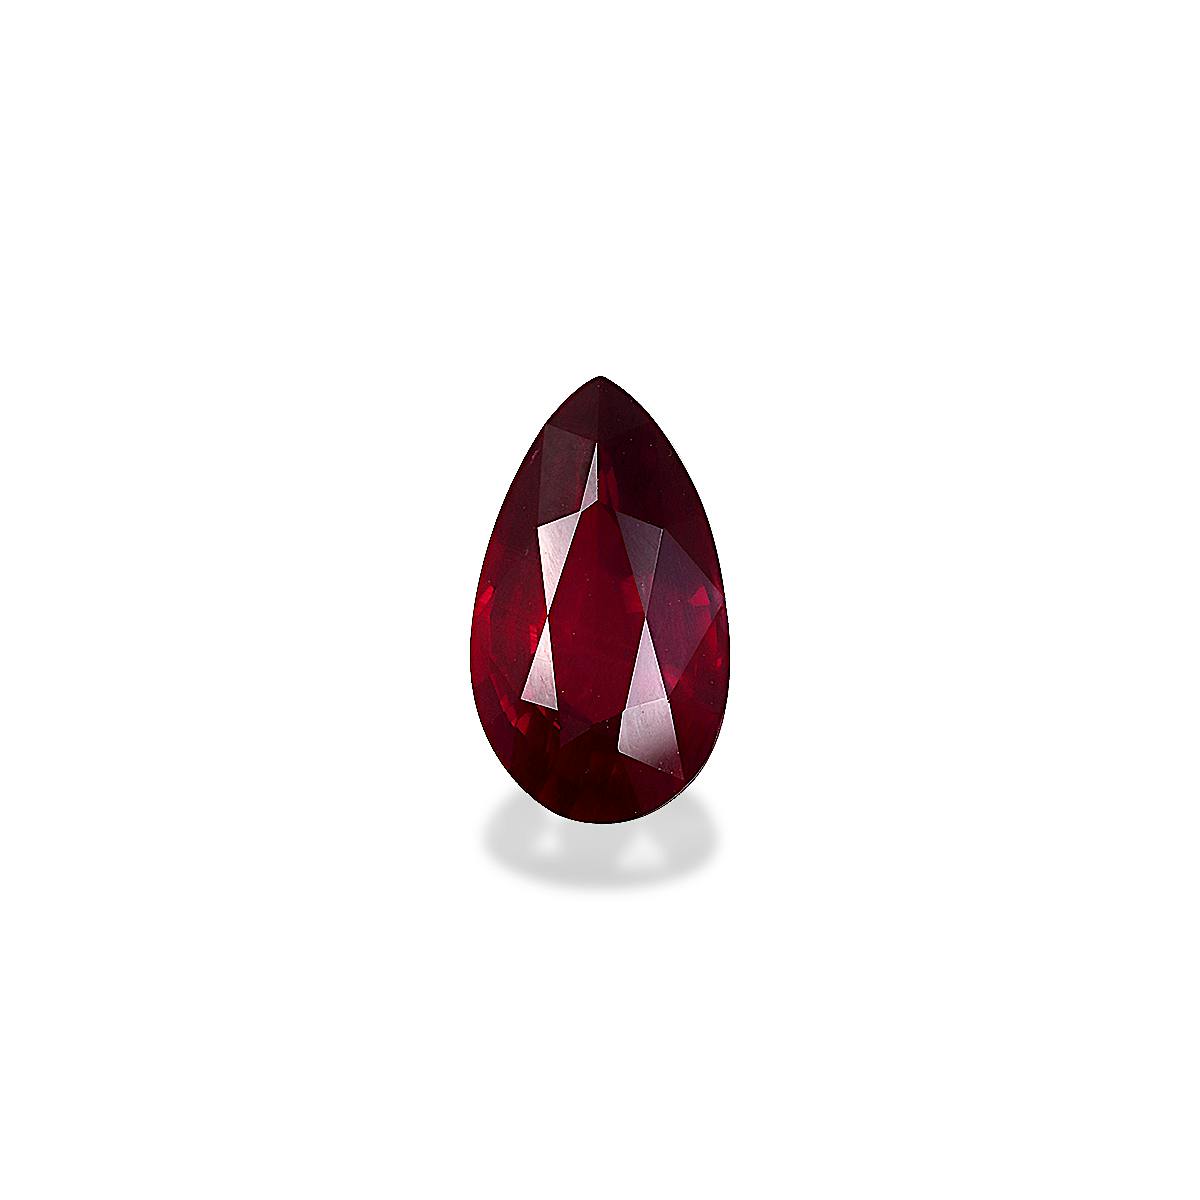 Mozambique Ruby 3.49ct - Main Image